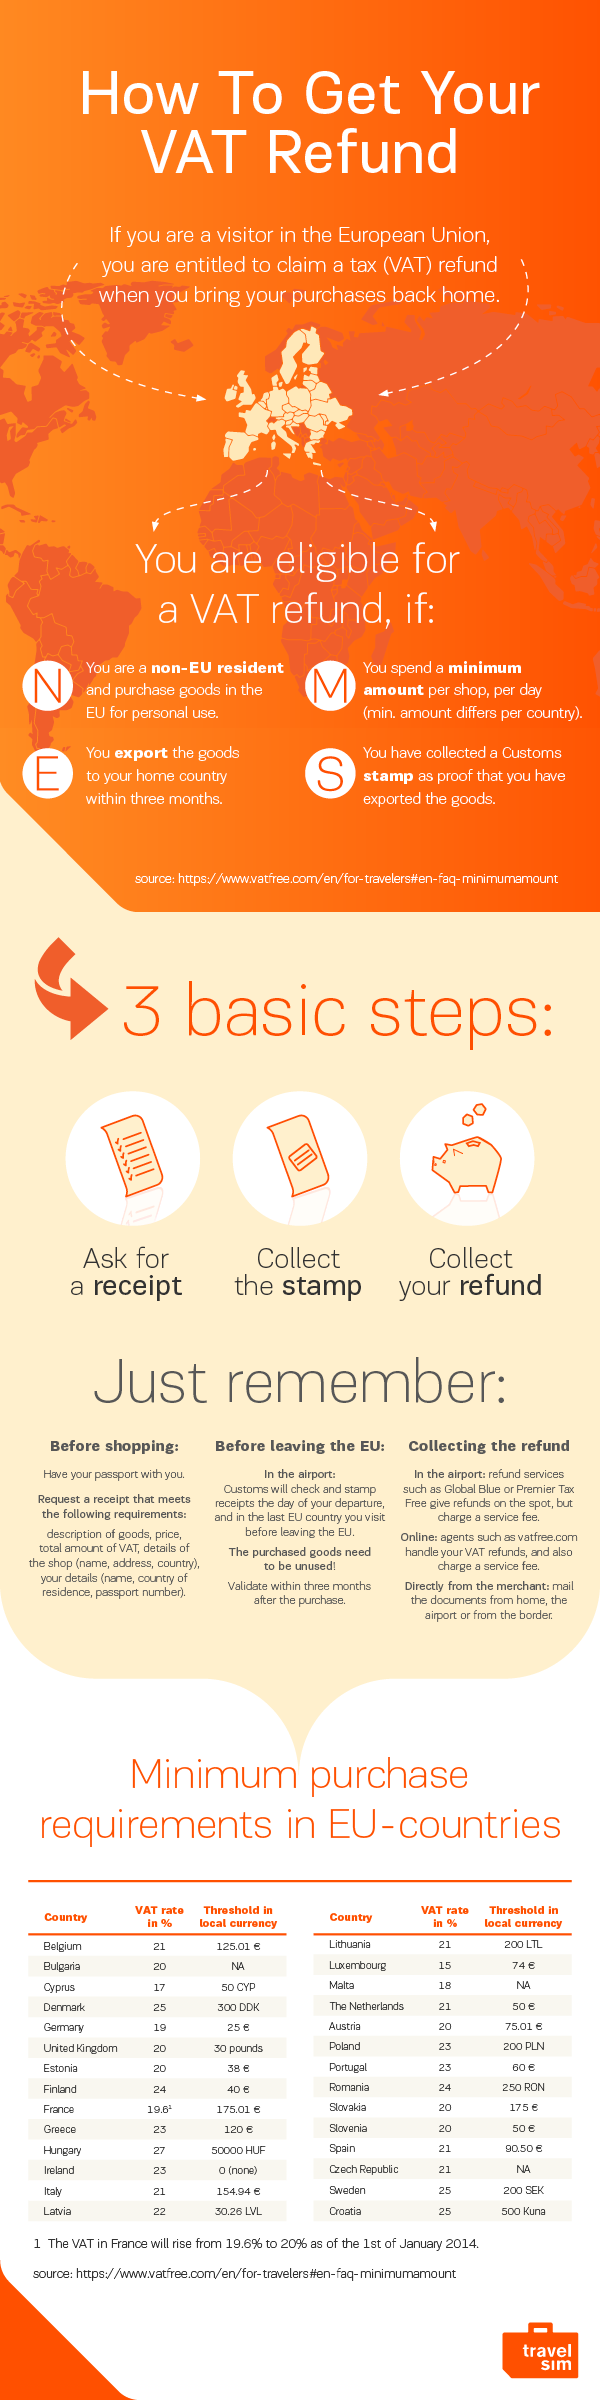 How to get your VAT refund infograph